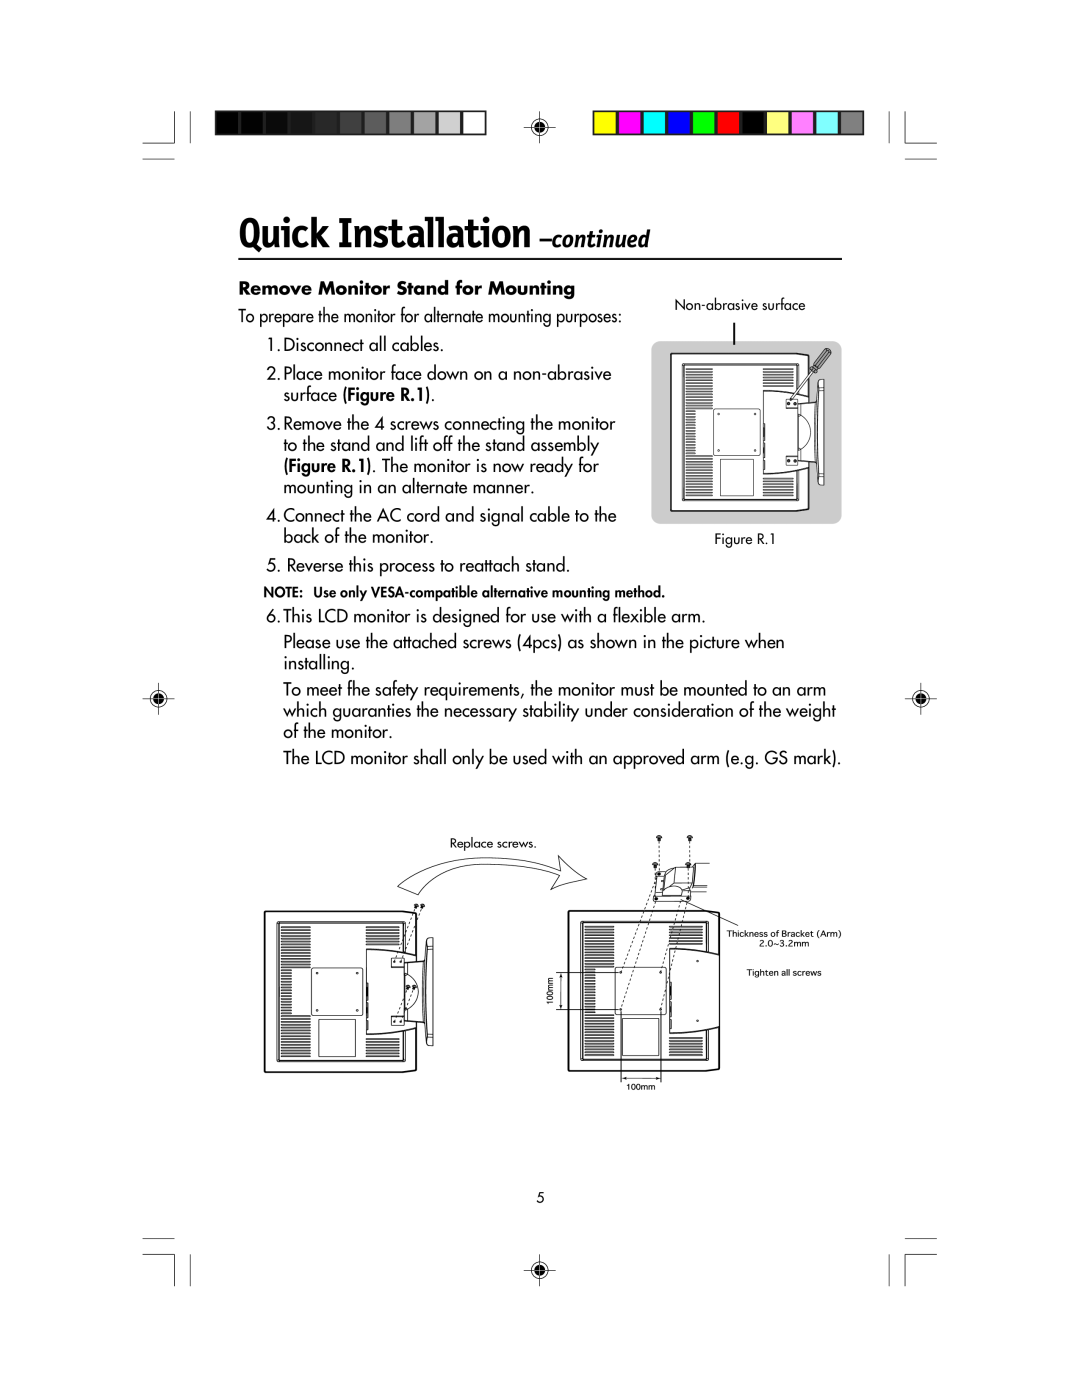 NEC LCD1920NX manual Quick Installation -continued, Remove Monitor Stand for Mounting 